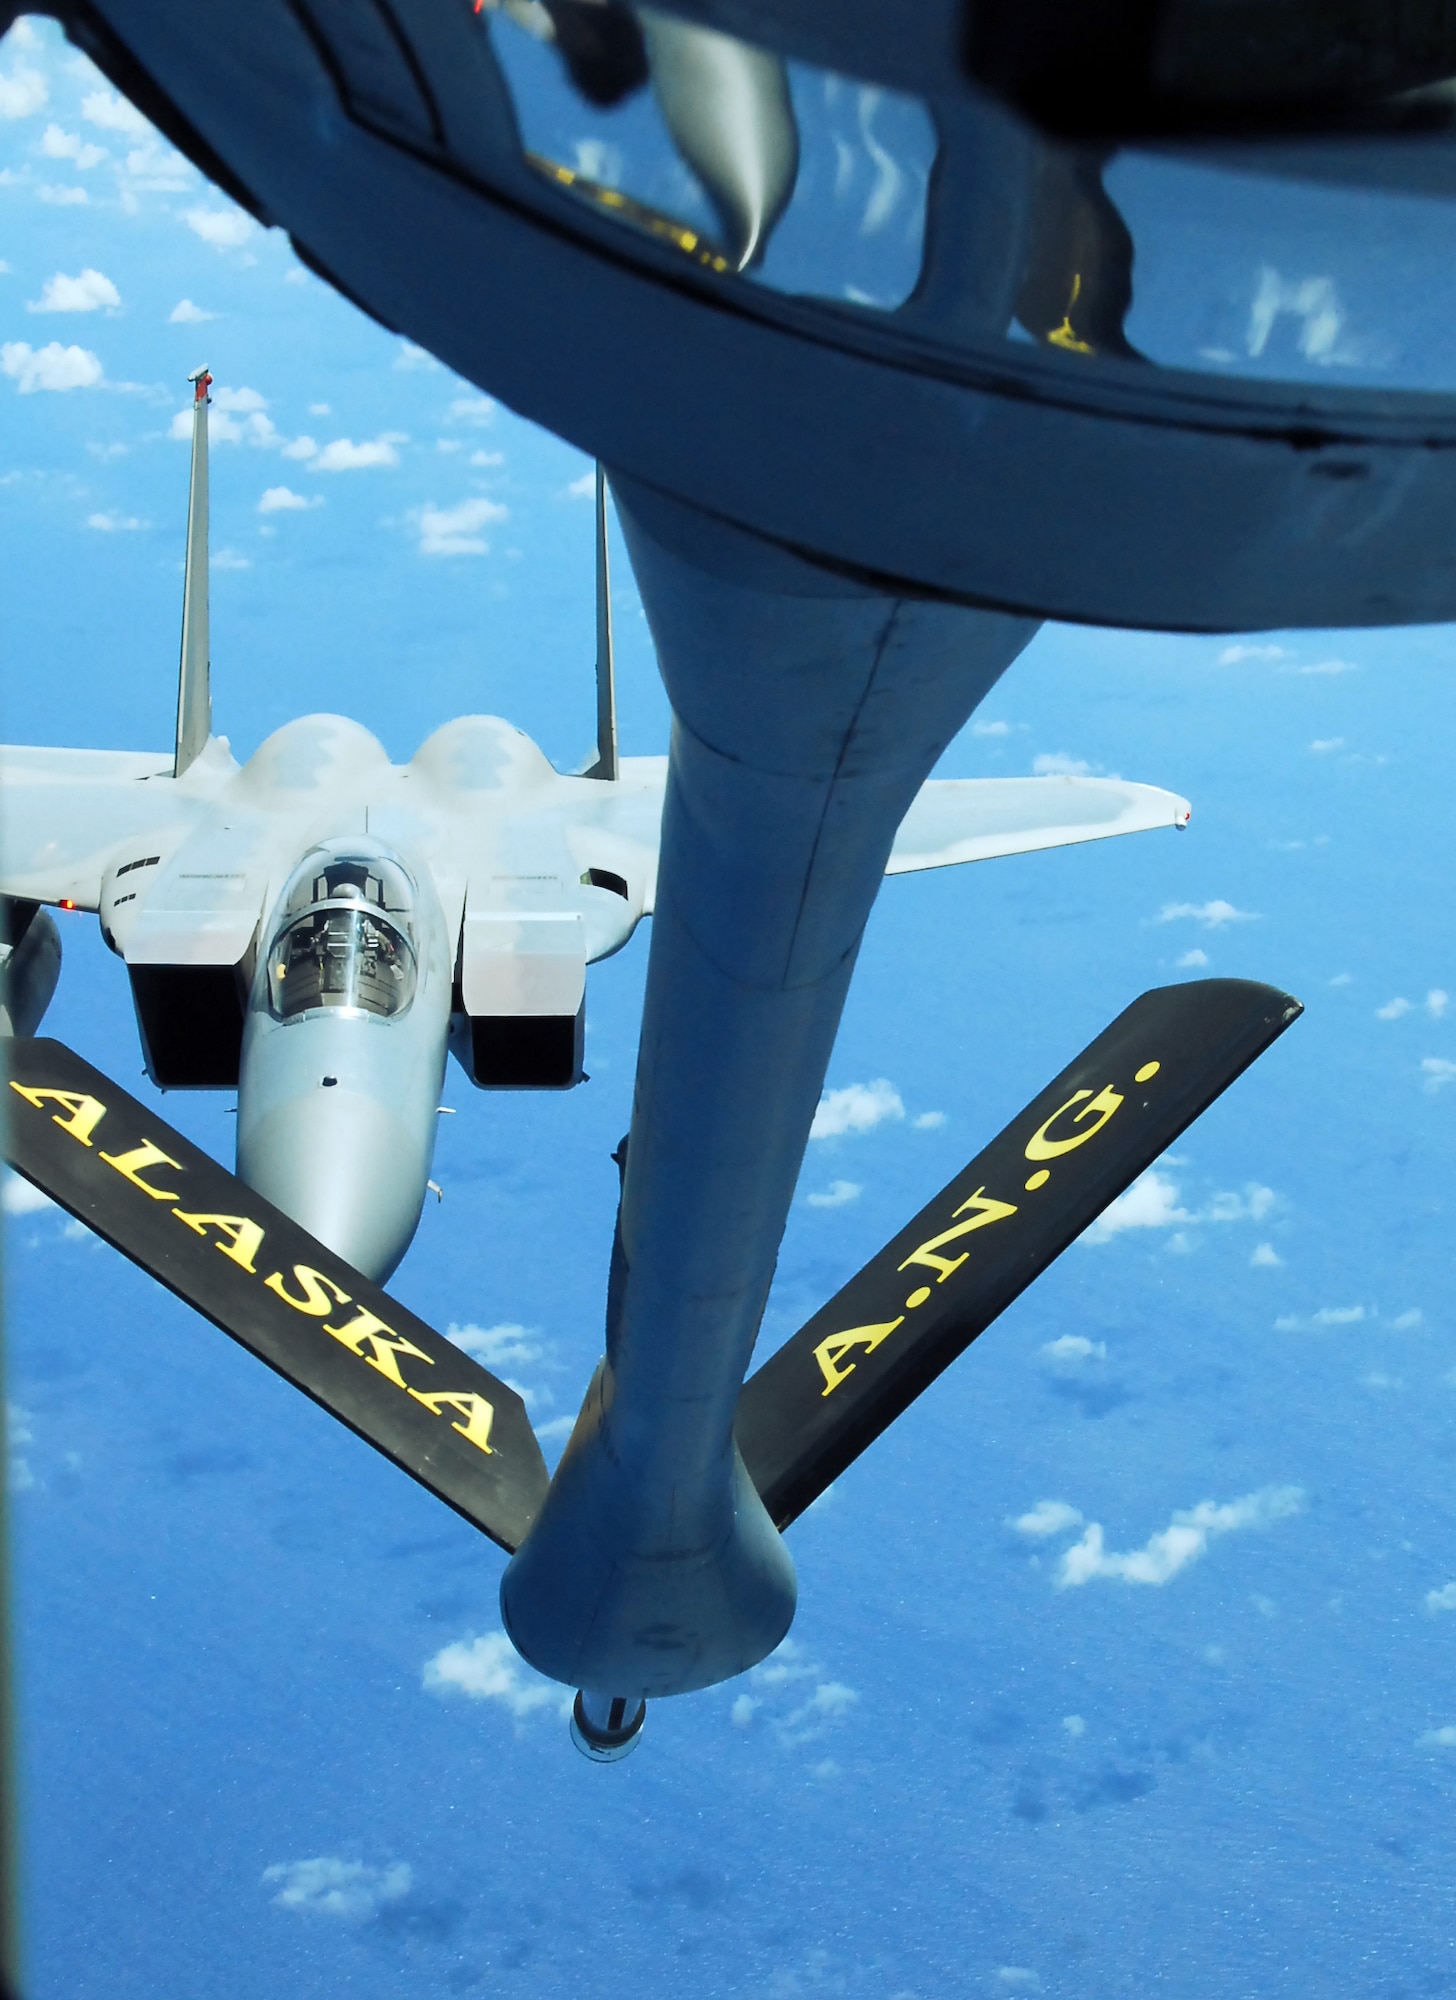 506th Expeditionary Air Refueling Squadron, an Air National Guard unit deployed here from the 168th Air Refueling Wing, Alaska, perform a midair refueling mission on an F-15 here. The 168th is deployed here in support of the continuous bomber presence and theater security packages in the Pacific region. (U. S. Air Force photo/Airman Whitney Amstutz)